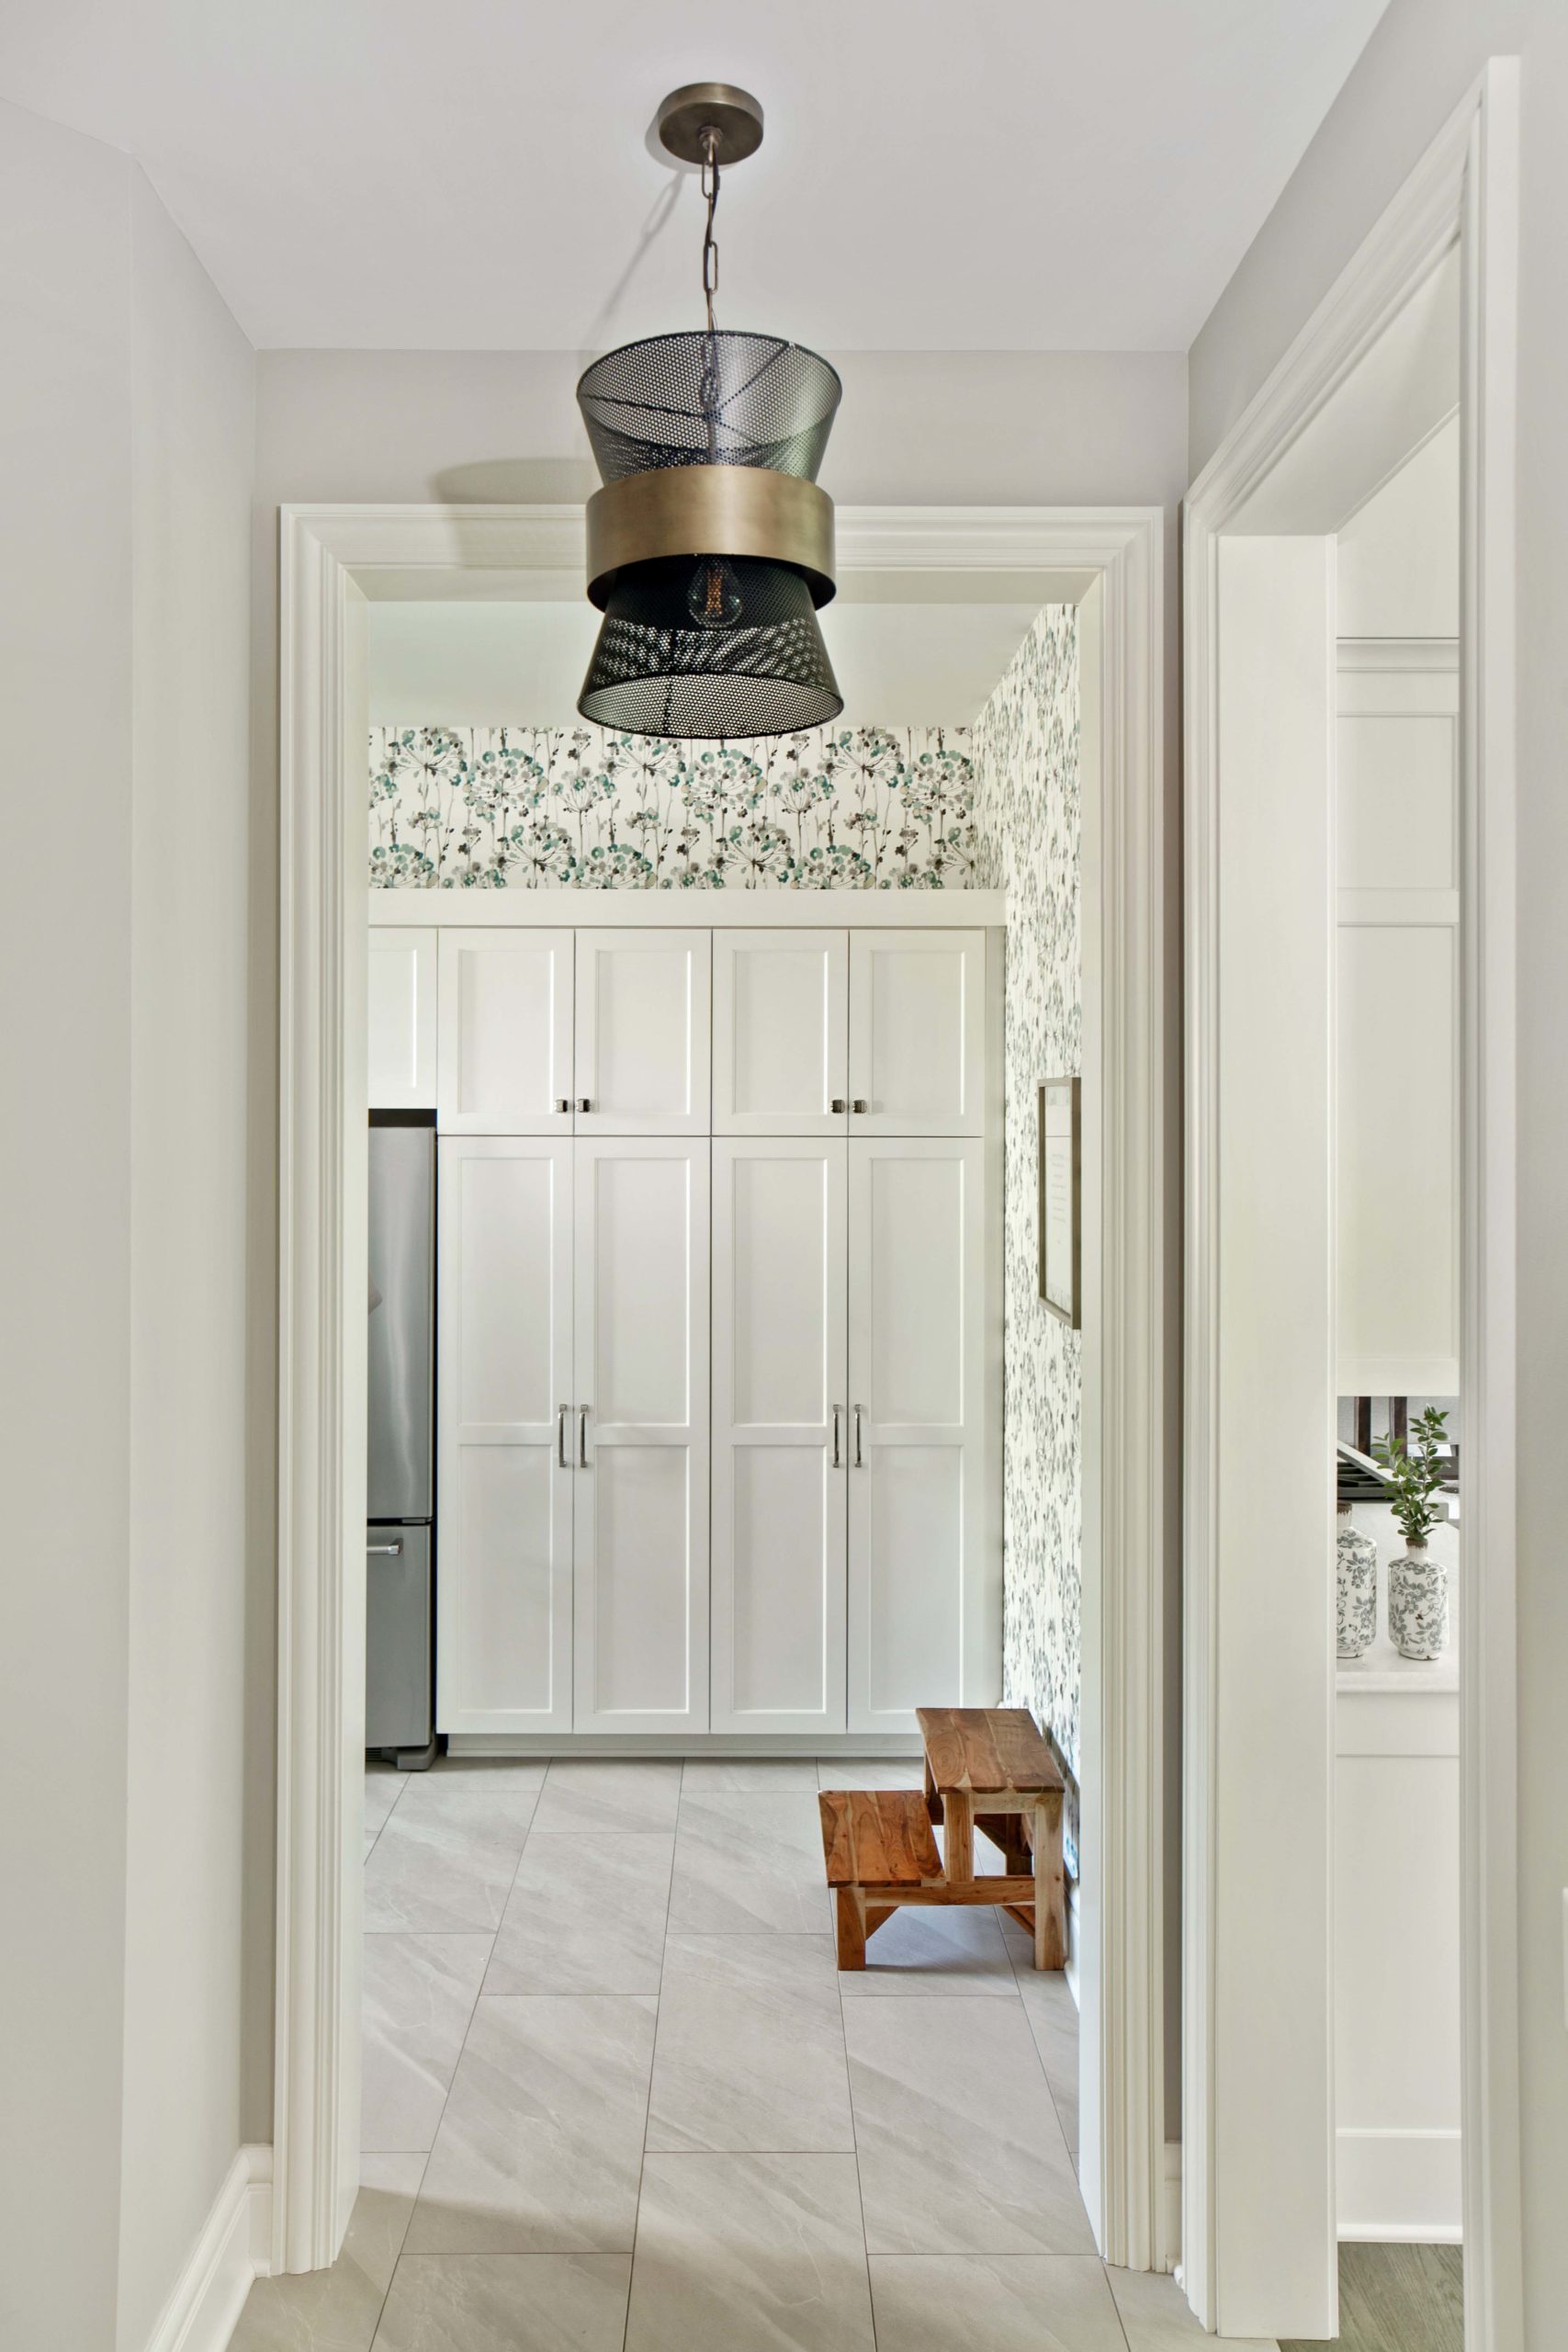 The Lake Escape custom home remodel showcases a hallway with white cabinets and a stylish light fixture.